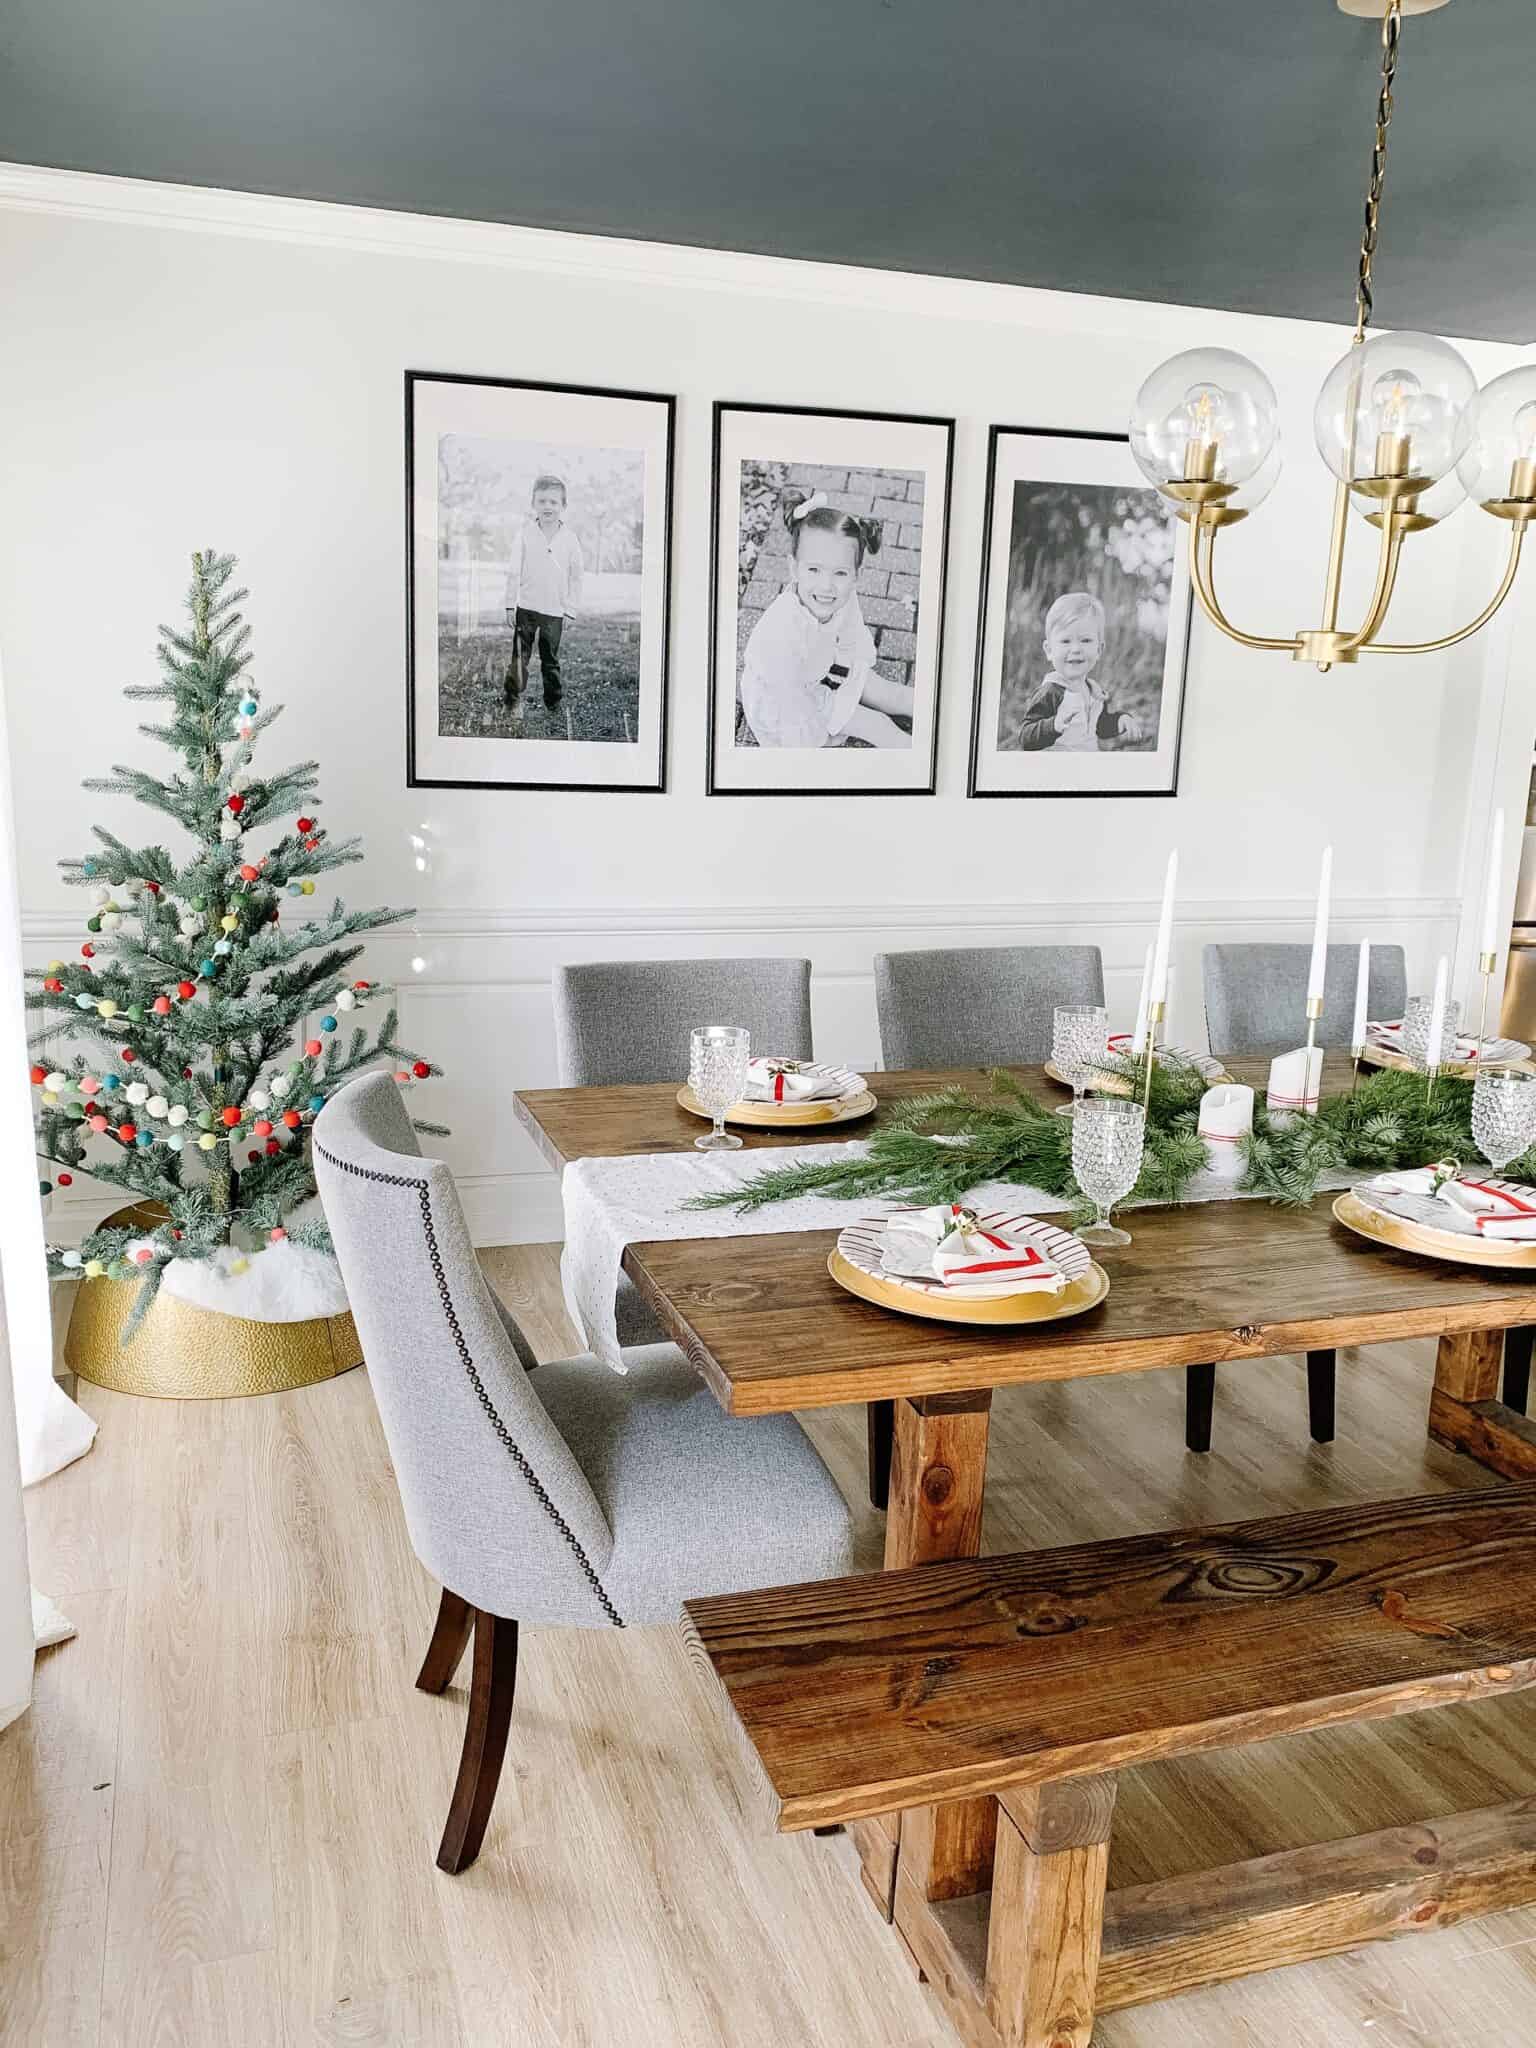 Candy Cane Inspired Dining Room Table Decor - arinsolangeathome